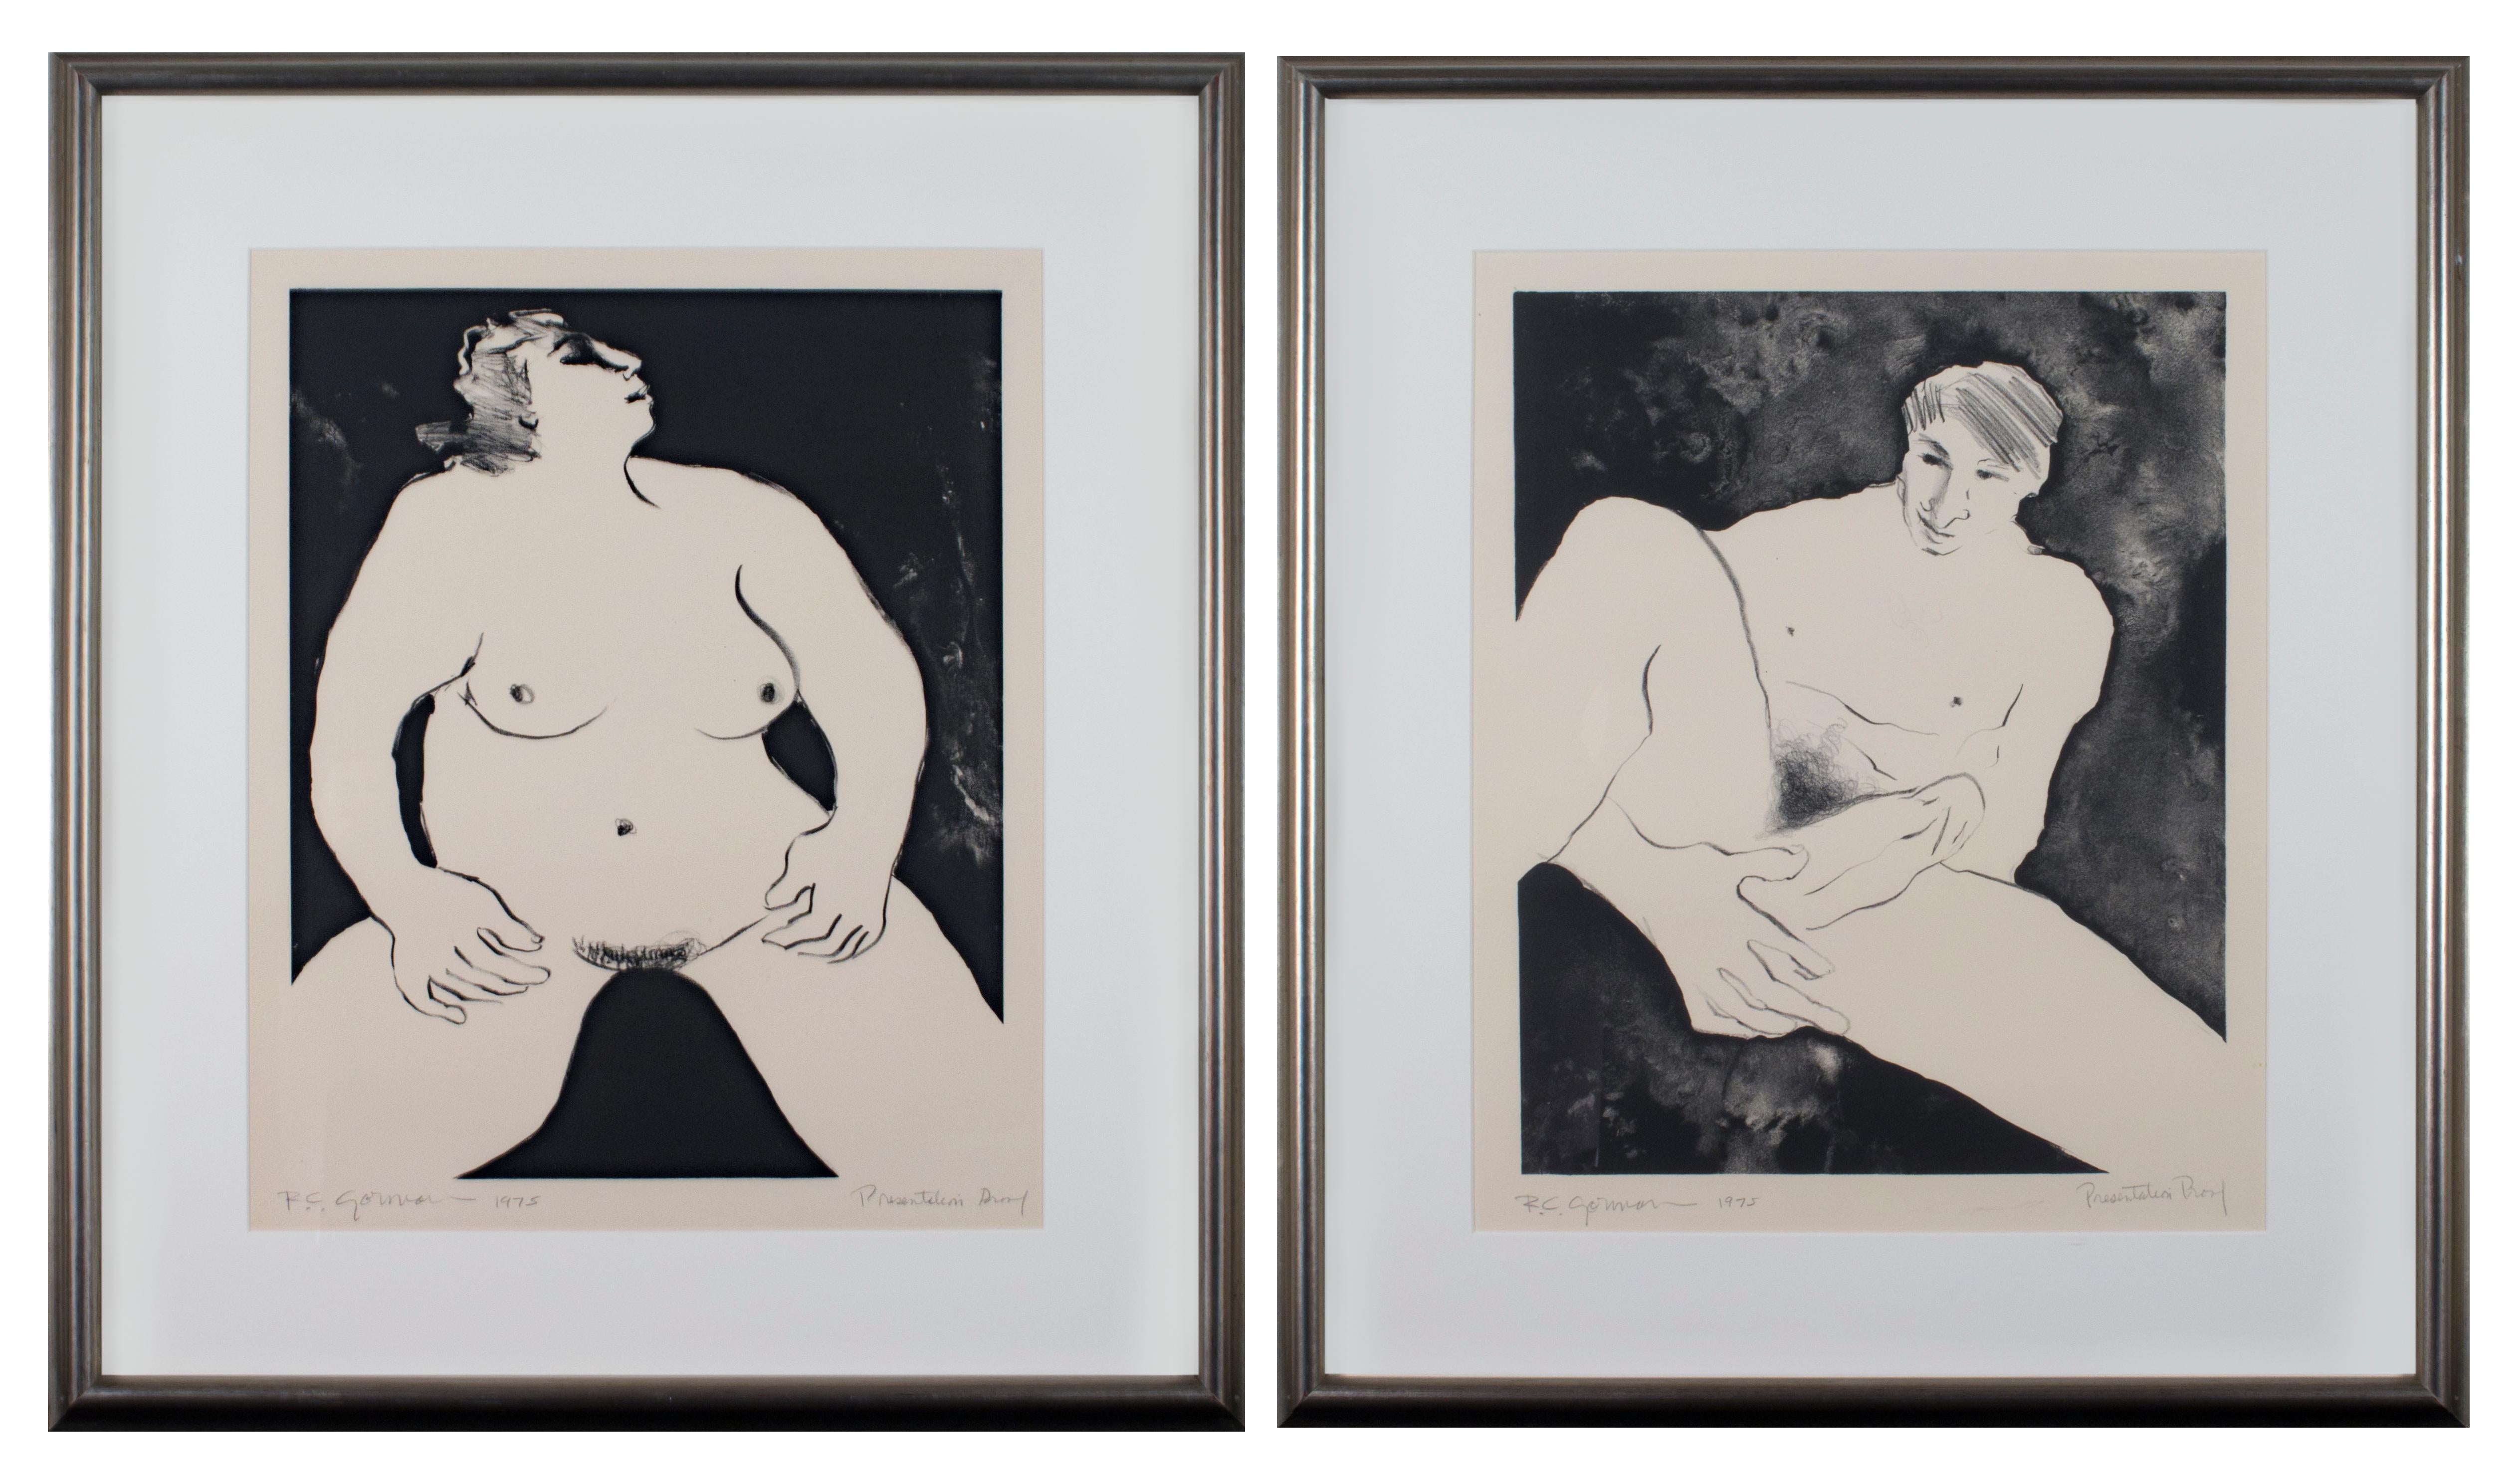 Rudolph Carl Gorman Nude Print - 'Nude Male and Nude Female, ' original lithograph pair signed by R.C. Gorman